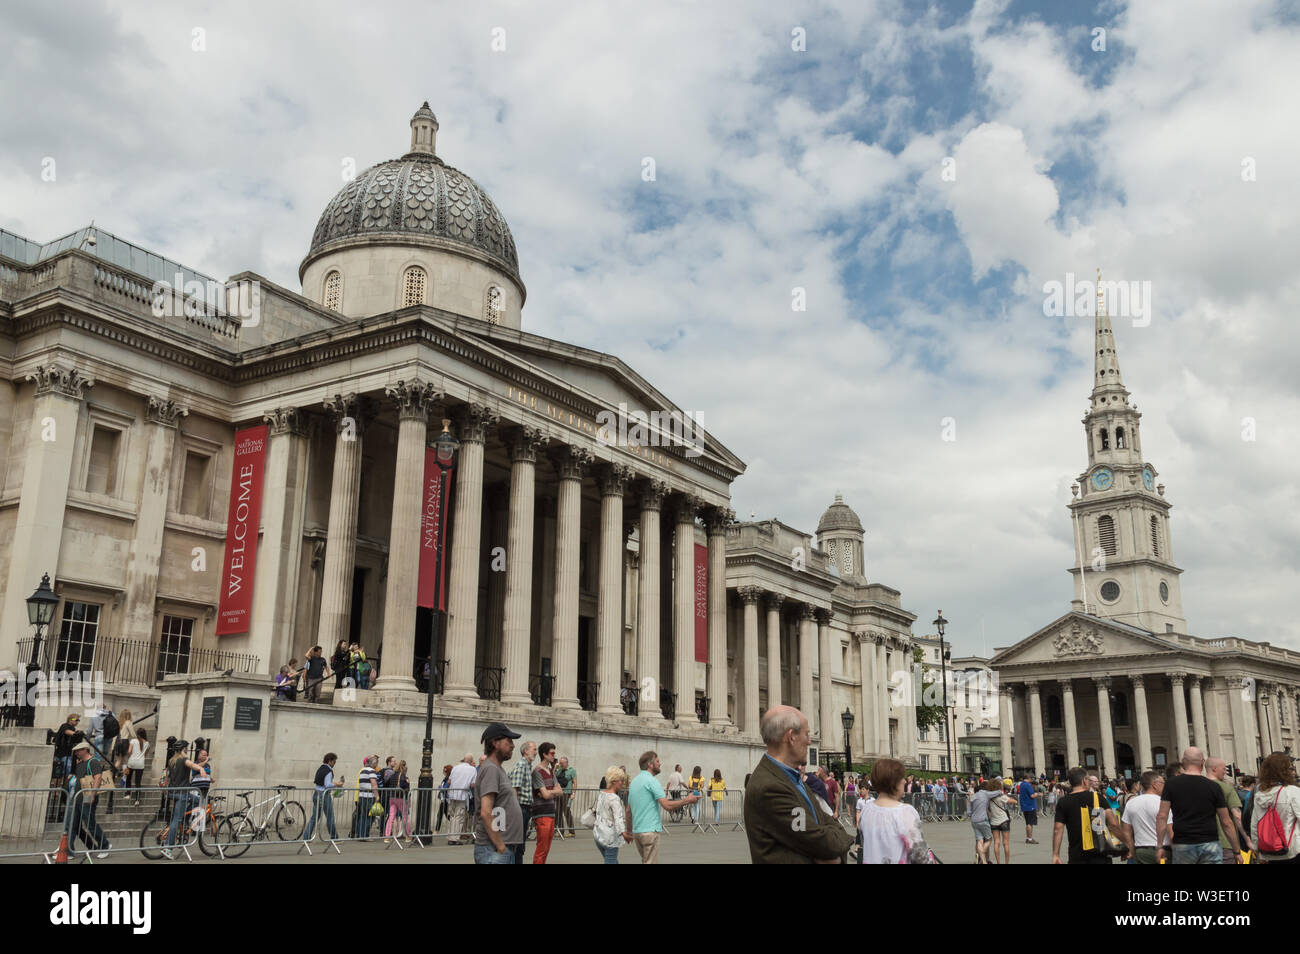 Facade of the National Gallery art museum crowded with tourists on a cloudy day.  Building is located in Trafalgar Square Stock Photo